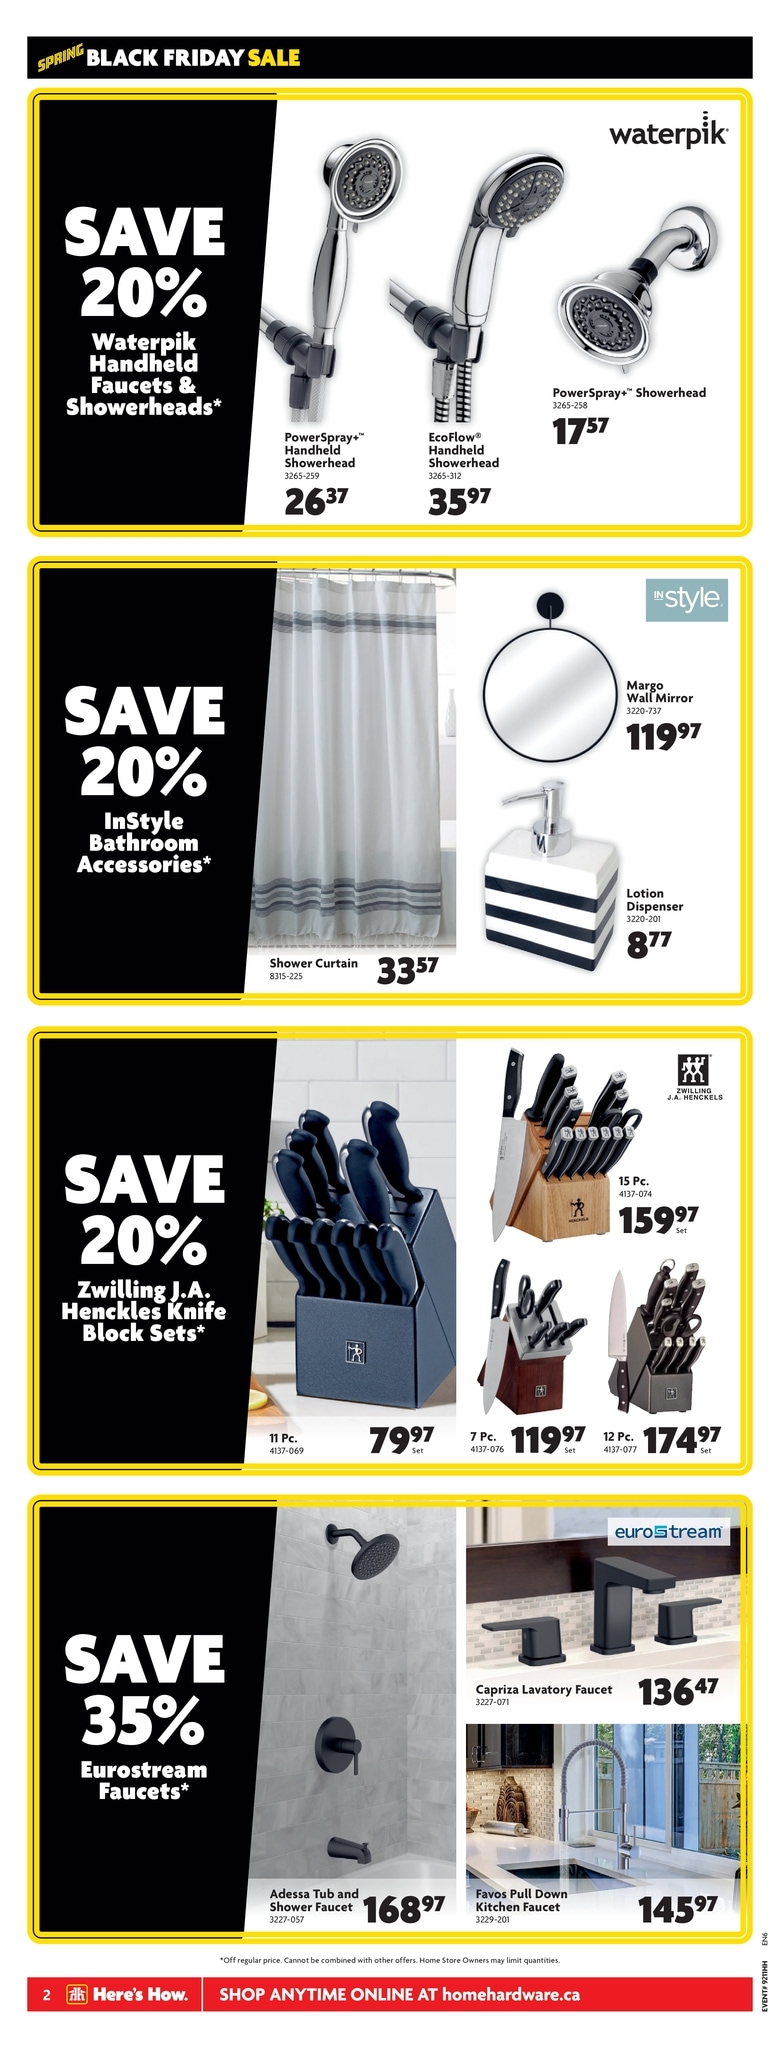 Home Hardware - Weekly Flyer Specials - Page 3